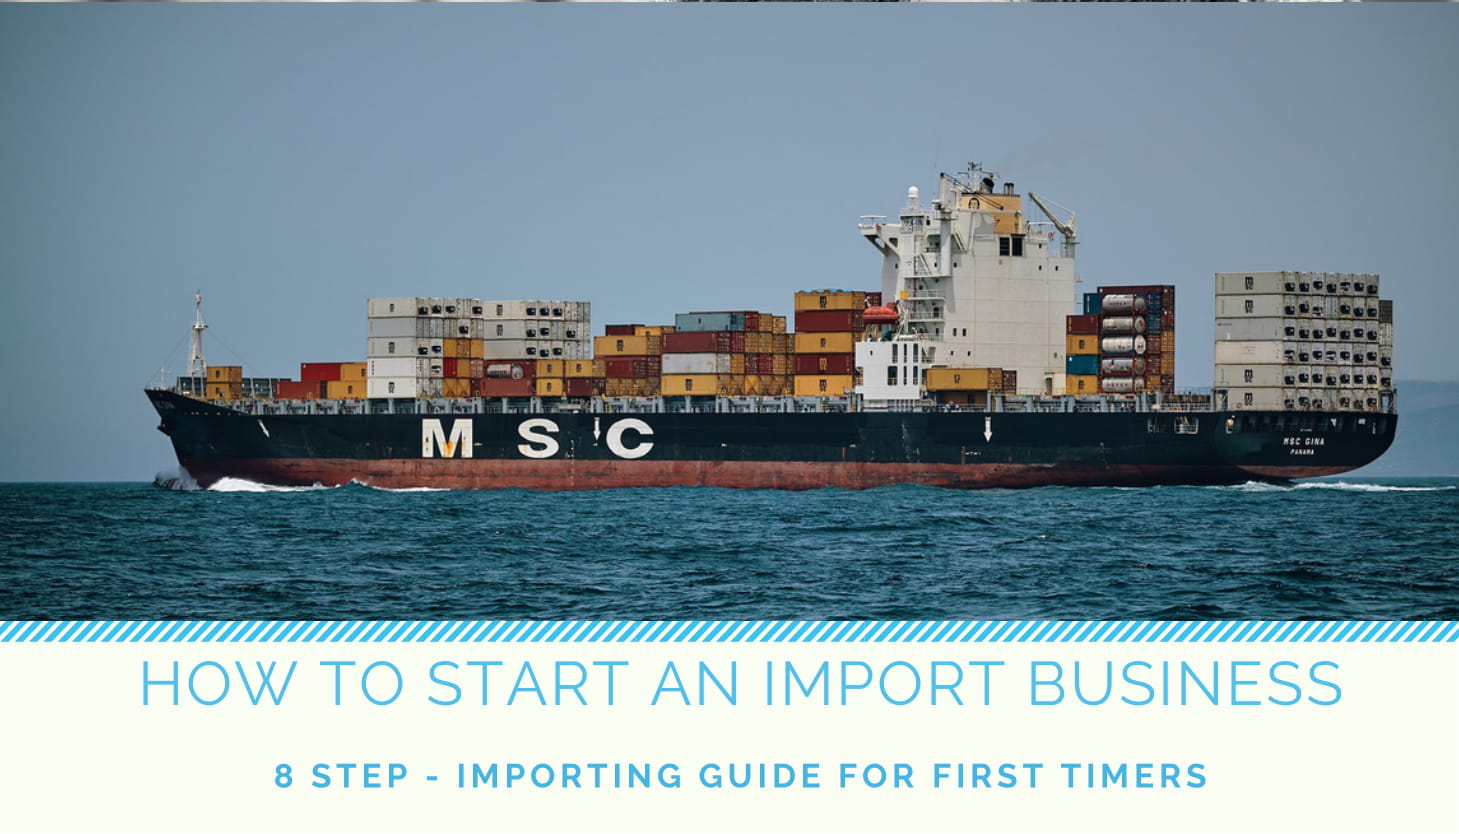 Importing guide for small business